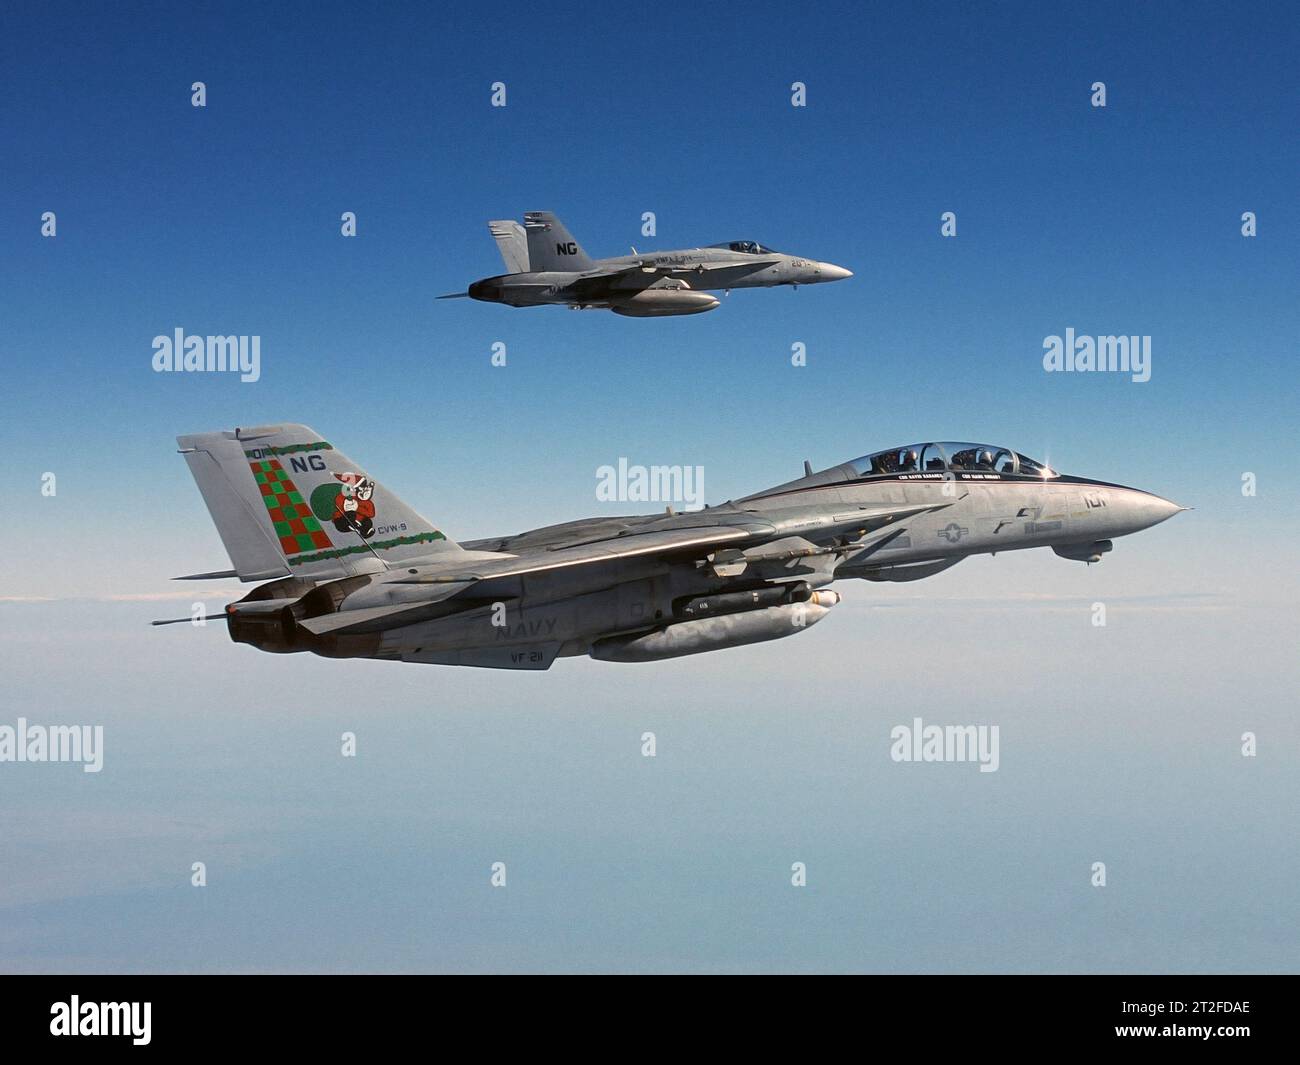 Santa Claus inspired tail design on an F-14, with an F/A-18 wingman flying alongside. Stock Photo